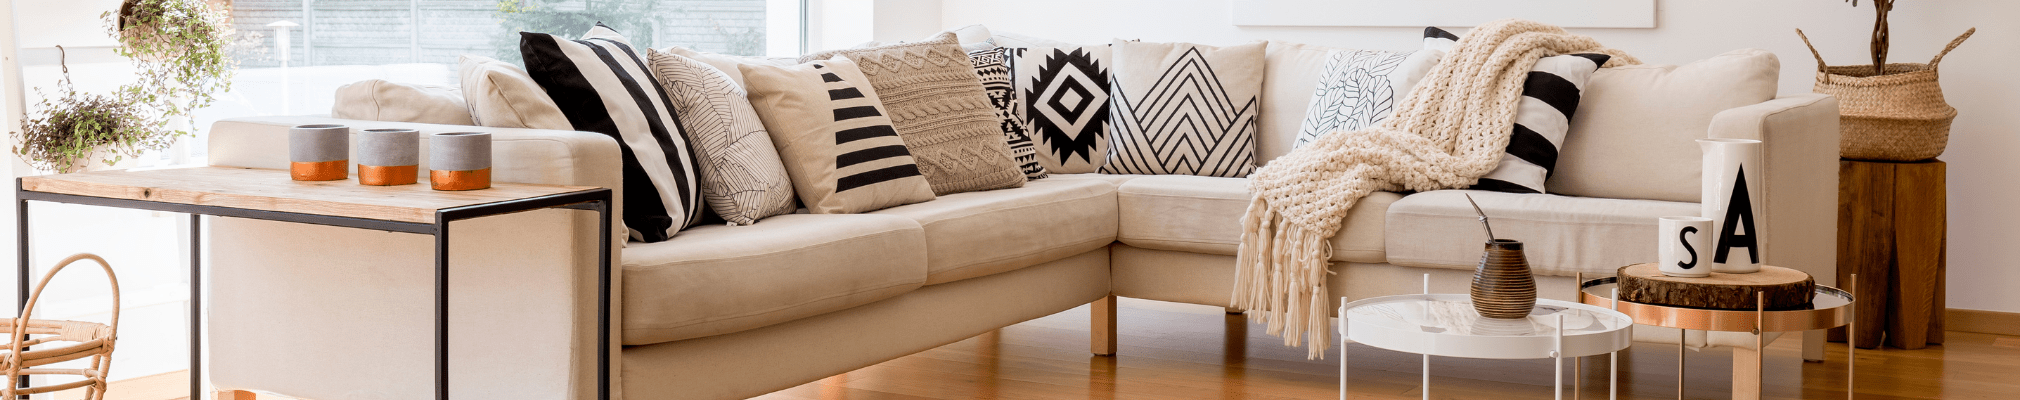 Neutral living room décor. Start your property search on Share to Buy!